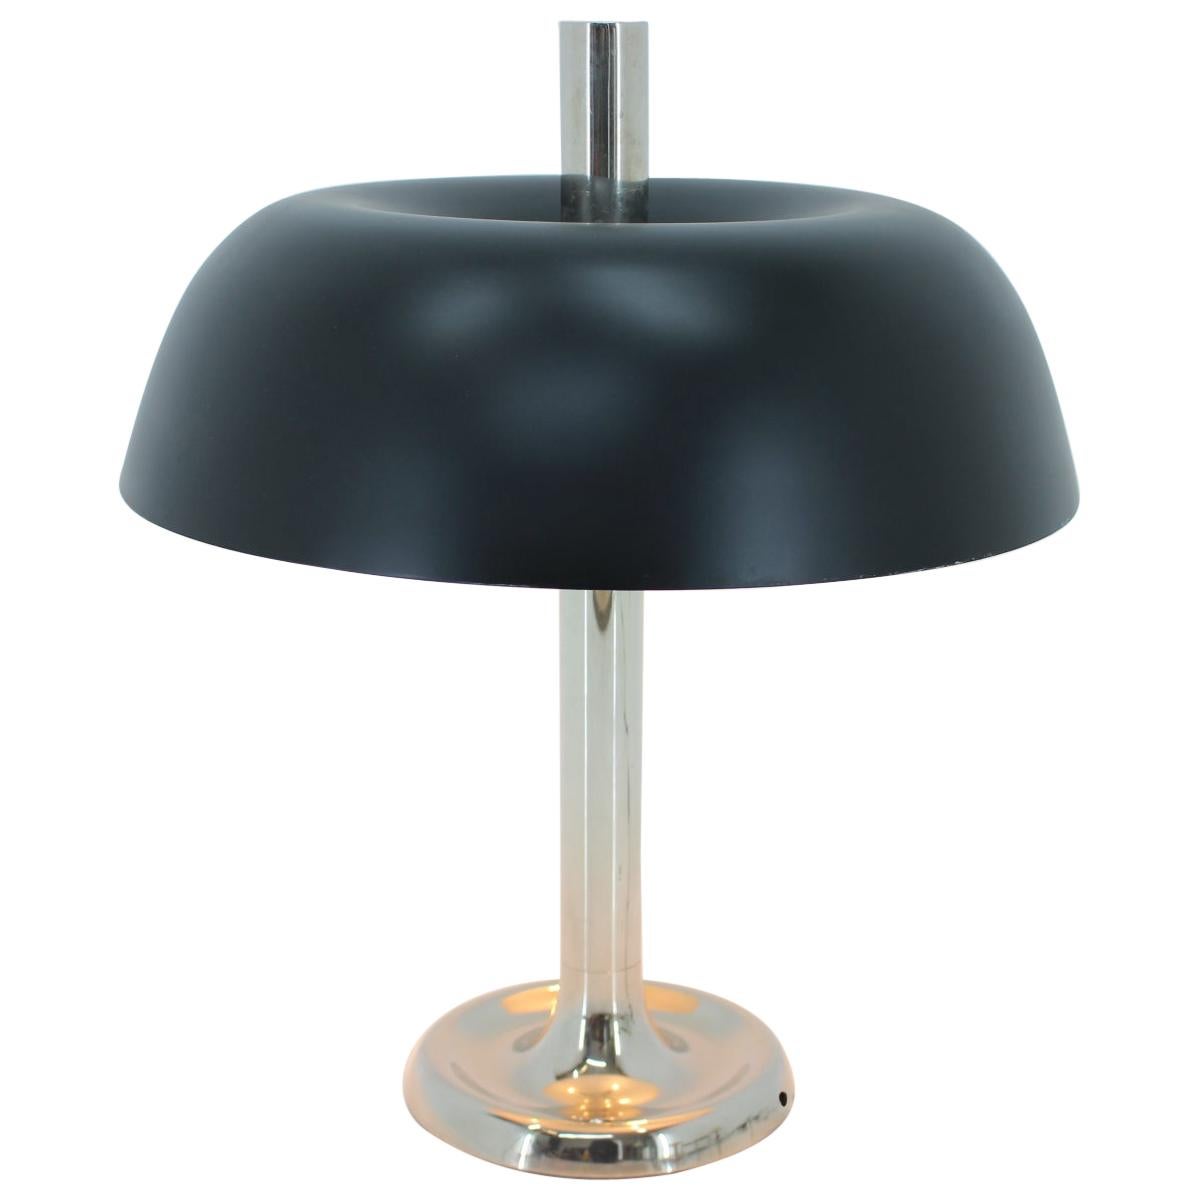 Big Design Extra Large Midcentury Mushroom Table Lamp by Hillebrand, 1970s For Sale